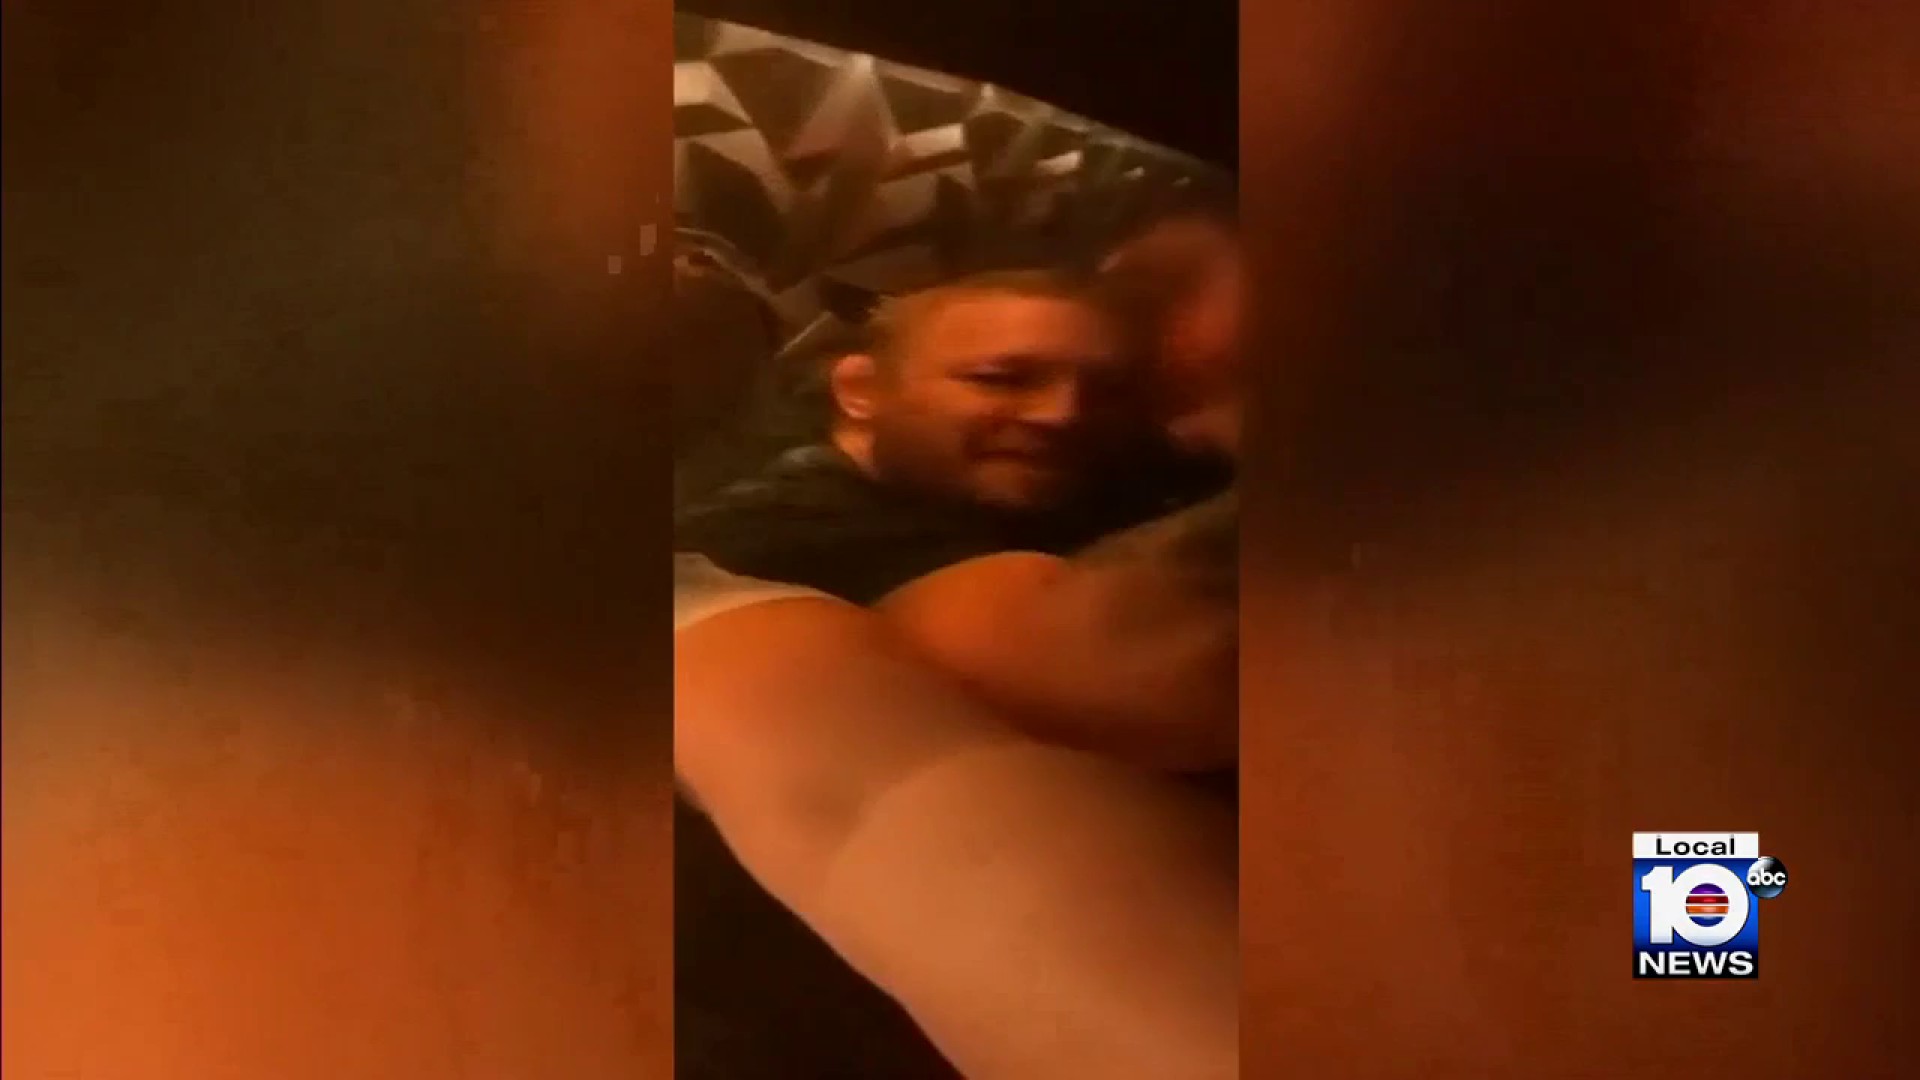 Repi Sex Videos - More video surfaces of Conor McGregor with woman who alleges rape